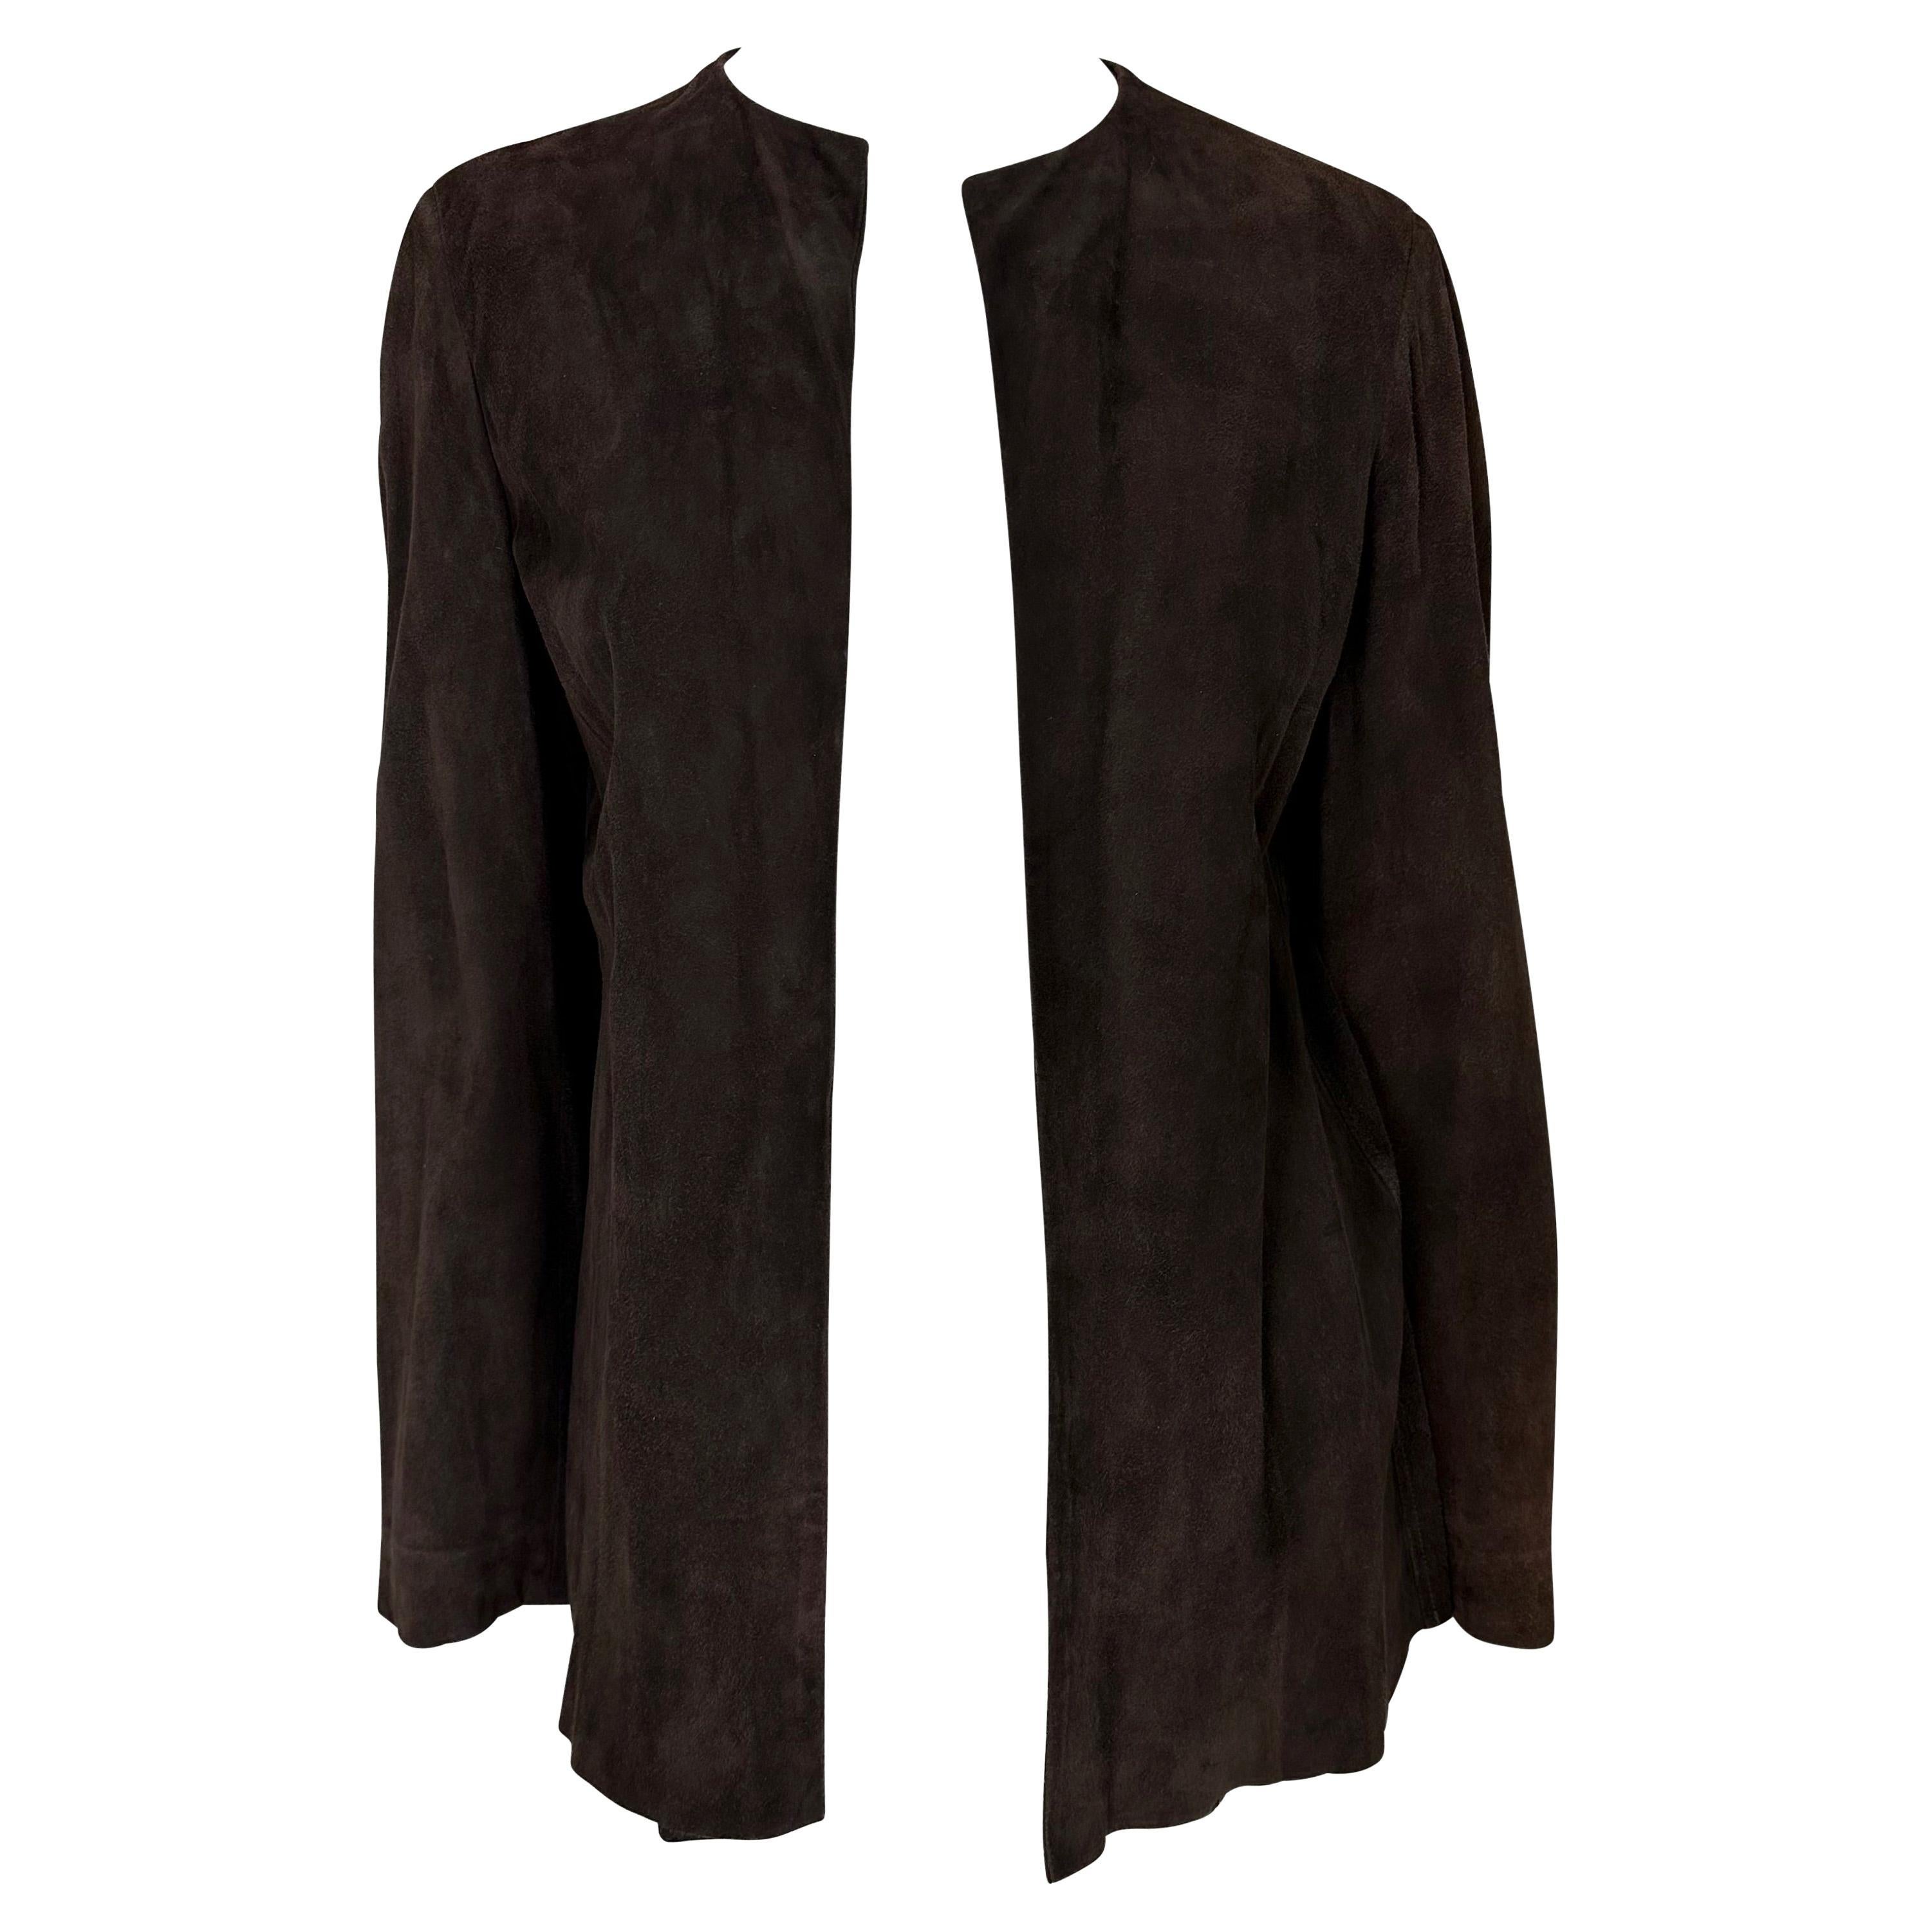 S/S 1997 Gucci by Tom Ford Naomi Runway Brown Suede Open Blouse Jacket